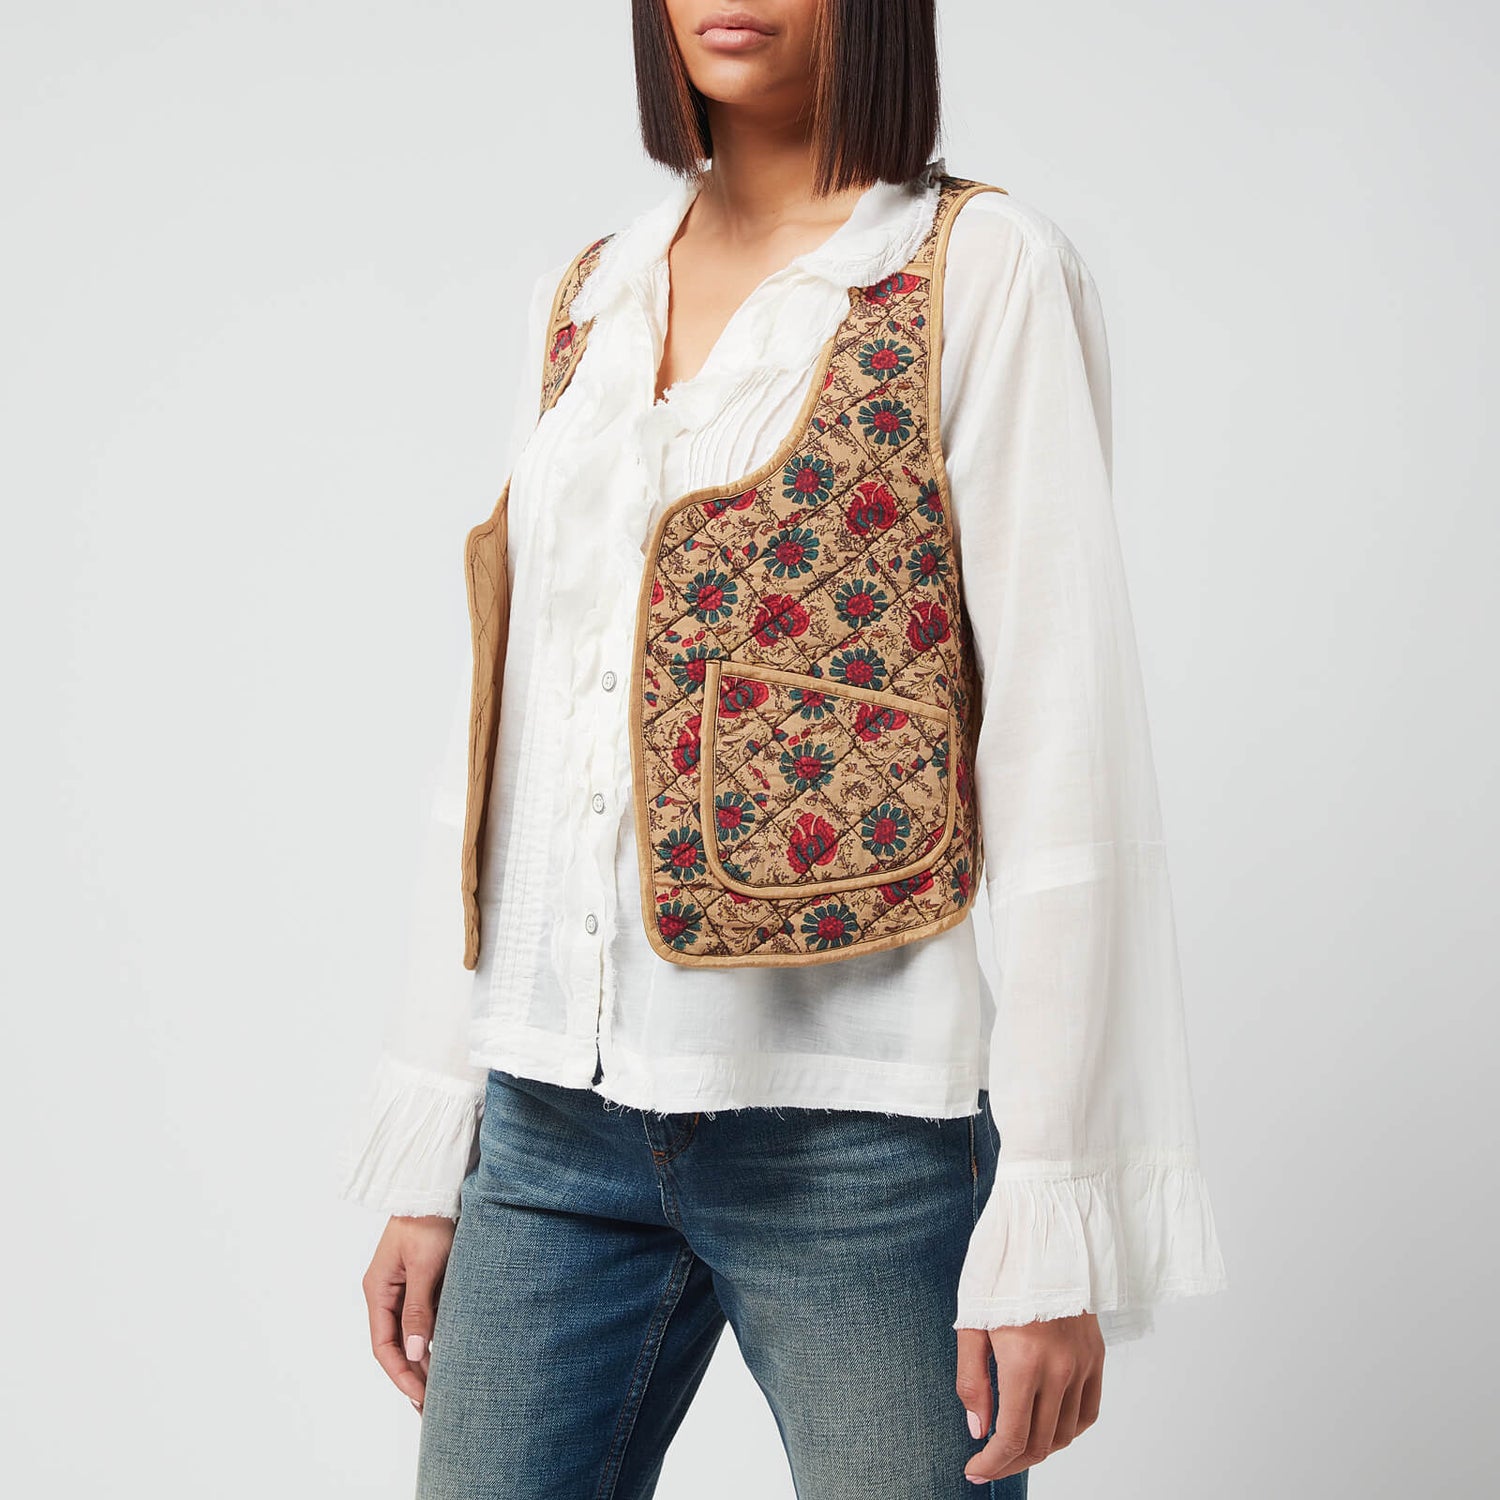 Free People Women's Kenzie Quilted Vest - Sand Combo - XS